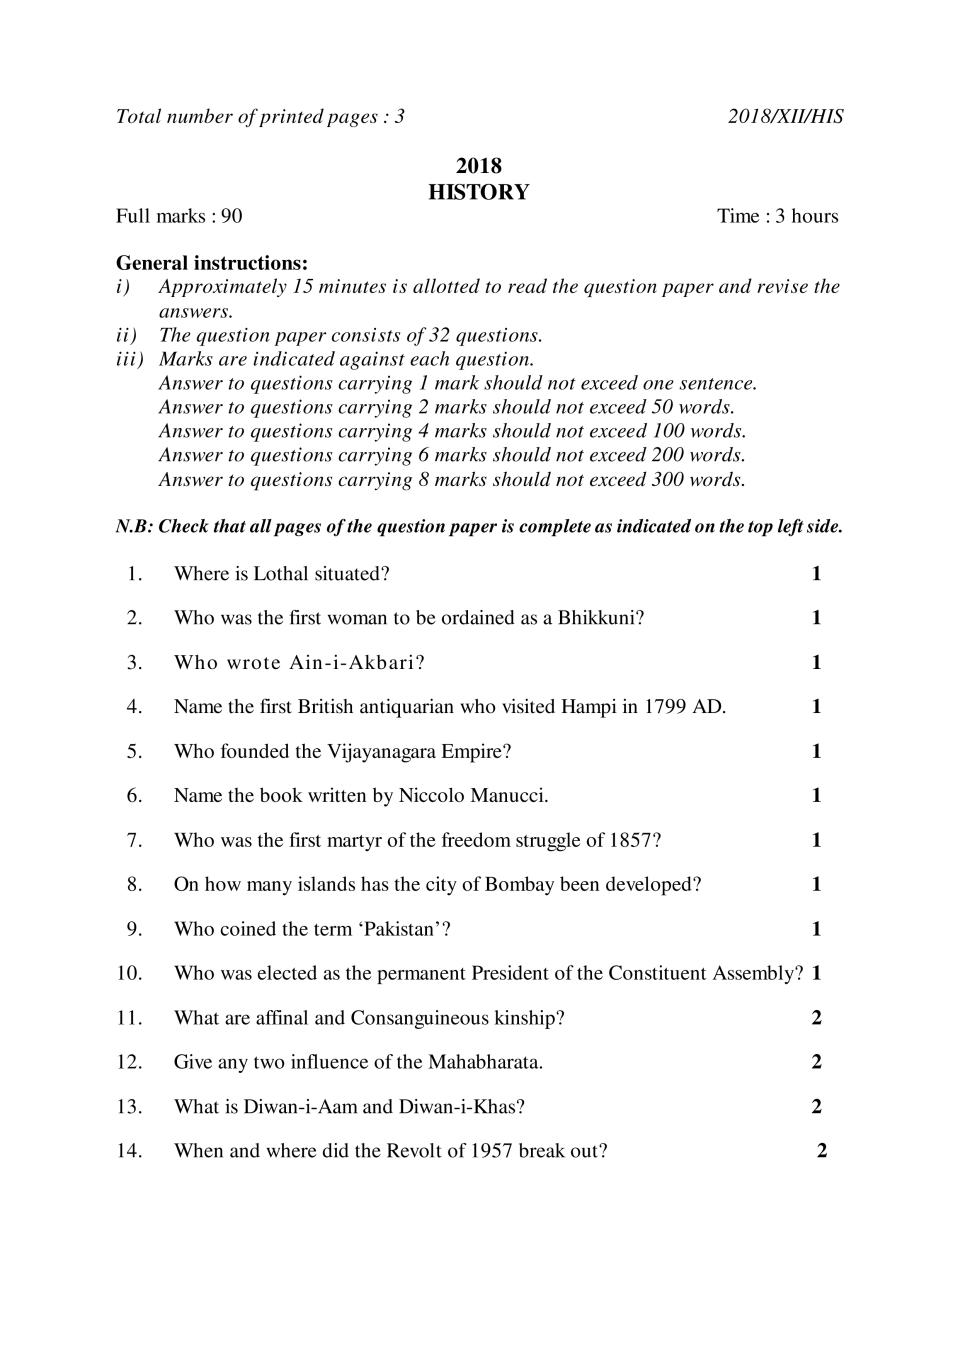 NBSE Class 12 Question Paper 2018 for History - Page 1